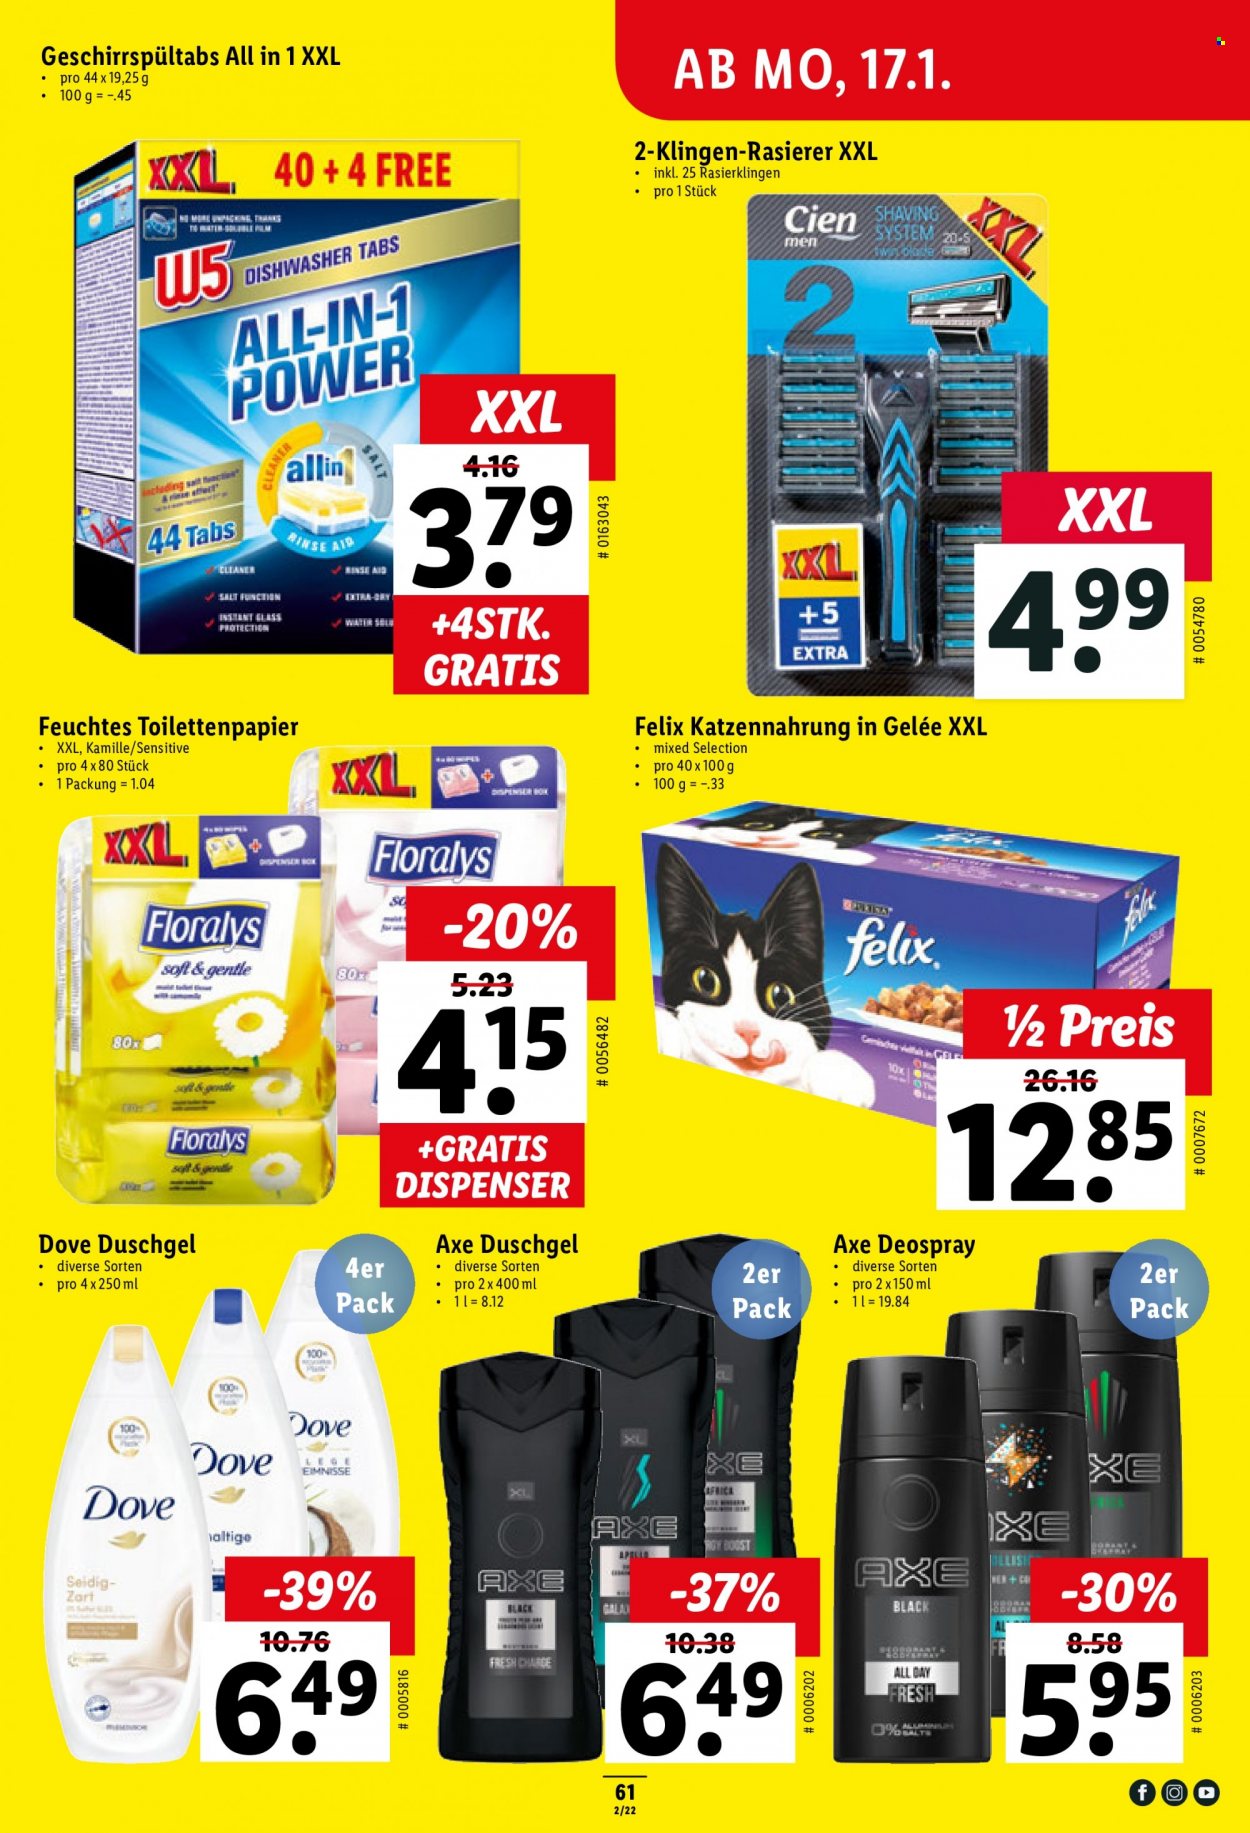 Catalogue Lidl - 13.1.2022 - 19.1.2022. Page 61.